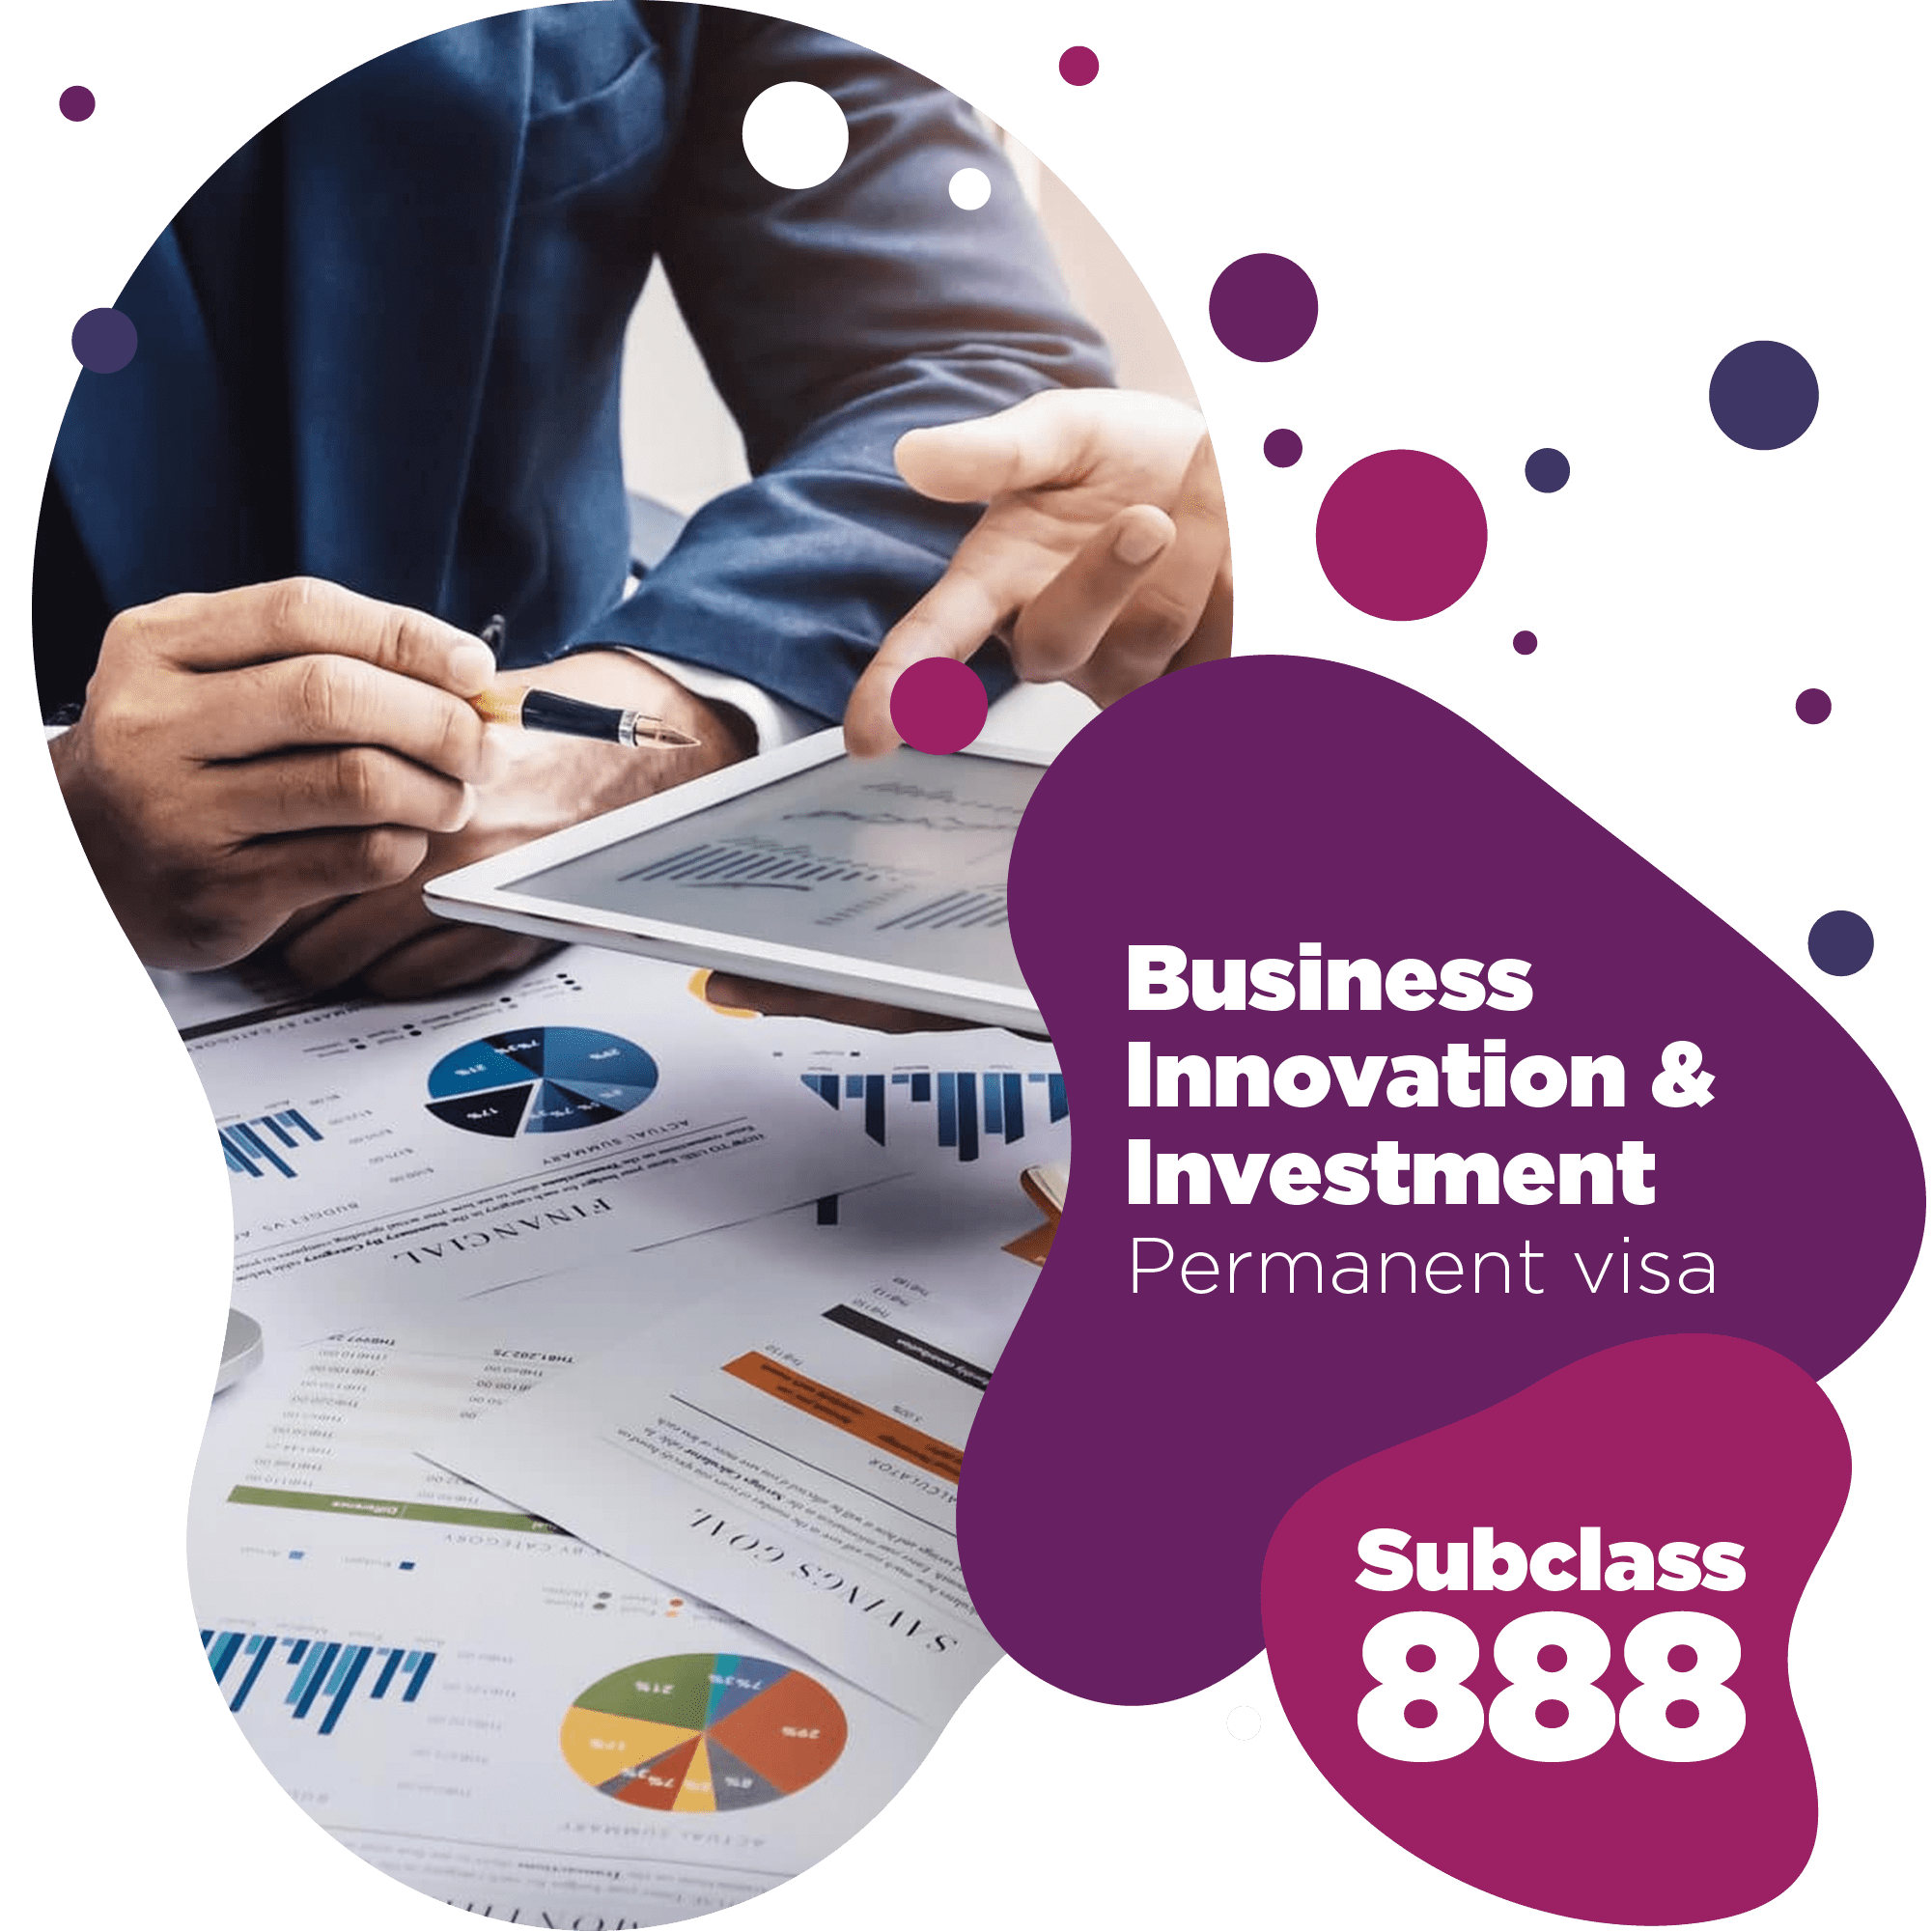 04-SN-Business-Investment-Subclass-888-Visa-01-min.png